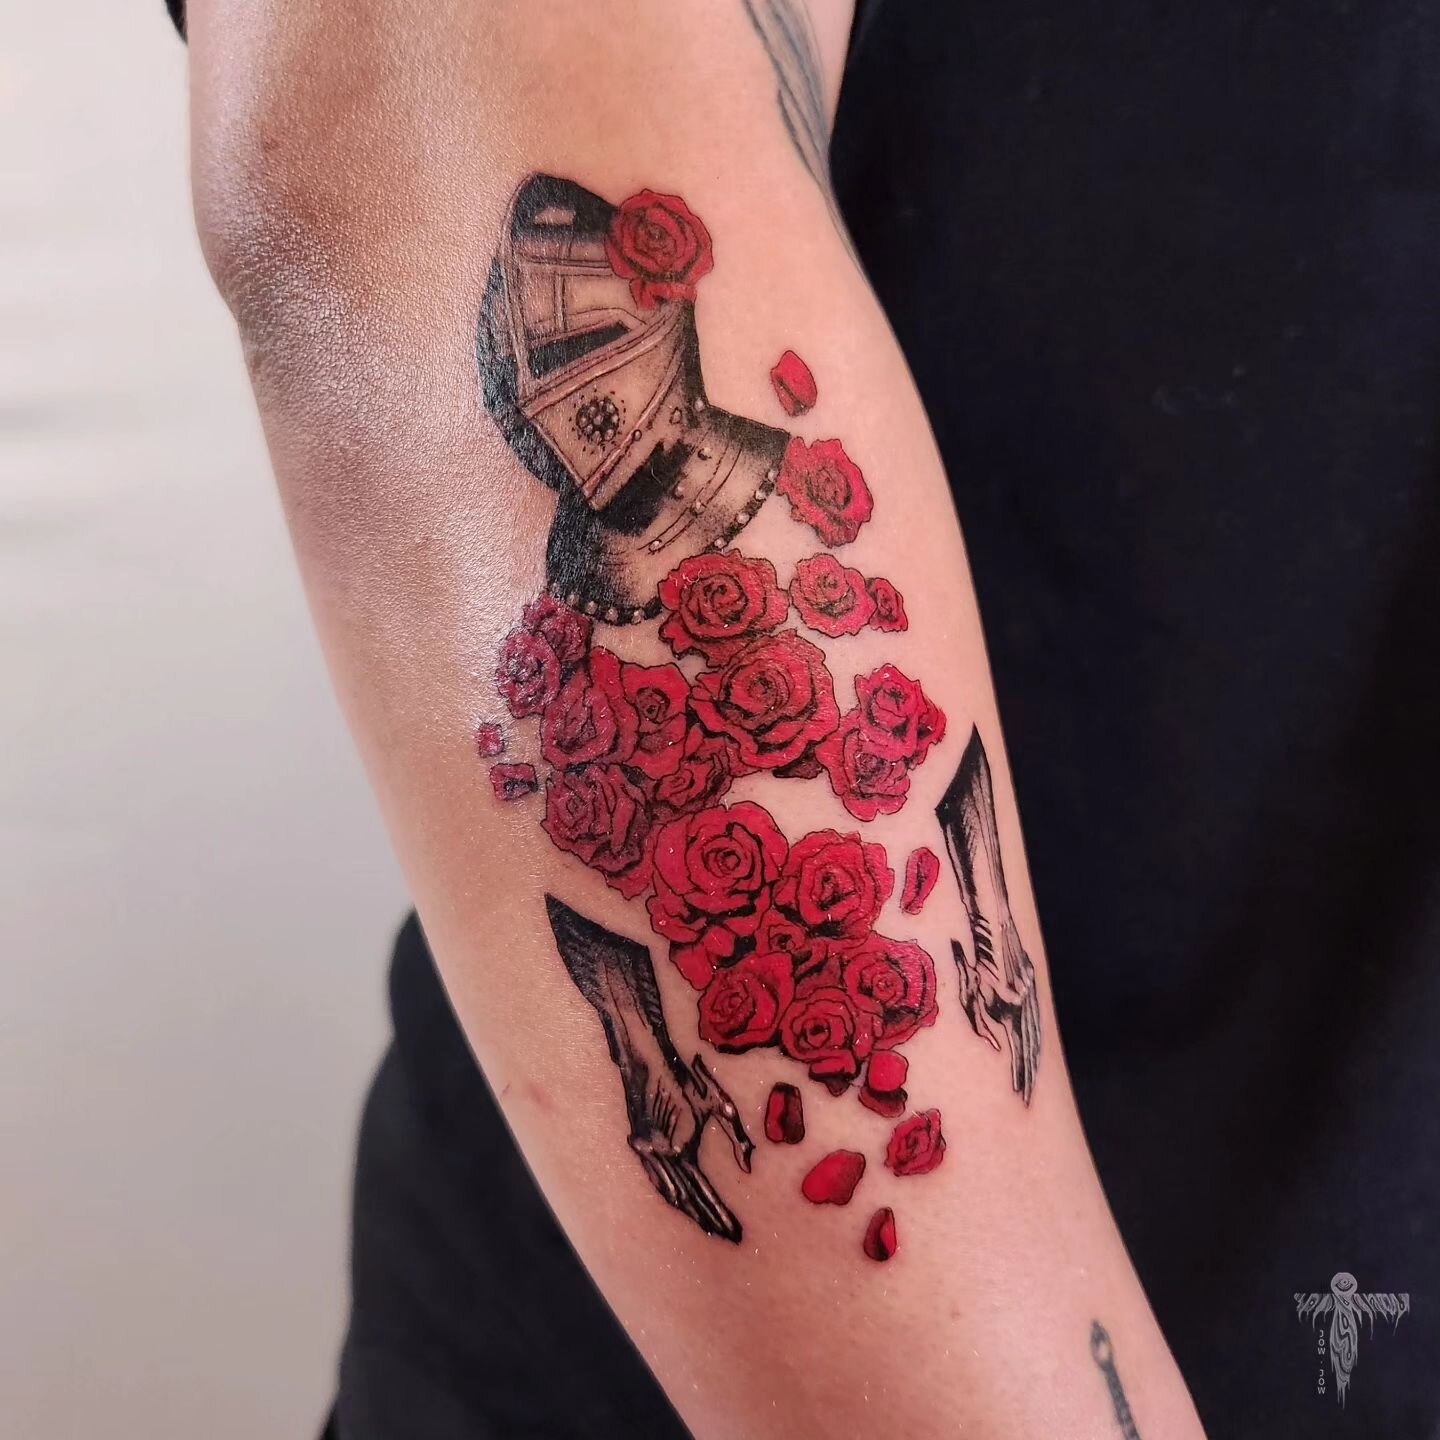 &mdash; 𝙁𝙖𝙡𝙡𝙞𝙣𝙜 𝙍𝙤𝙨𝙚𝙨 &mdash;

For Kari &mdash; Thank you!! I really enjoyed chatting with you and honored to have been able to add to your impressive ink collection. :D

[ 4.5 hrs ]&nbsp;

#knightattoo #darktattoos #rosetattoos #sftattoo